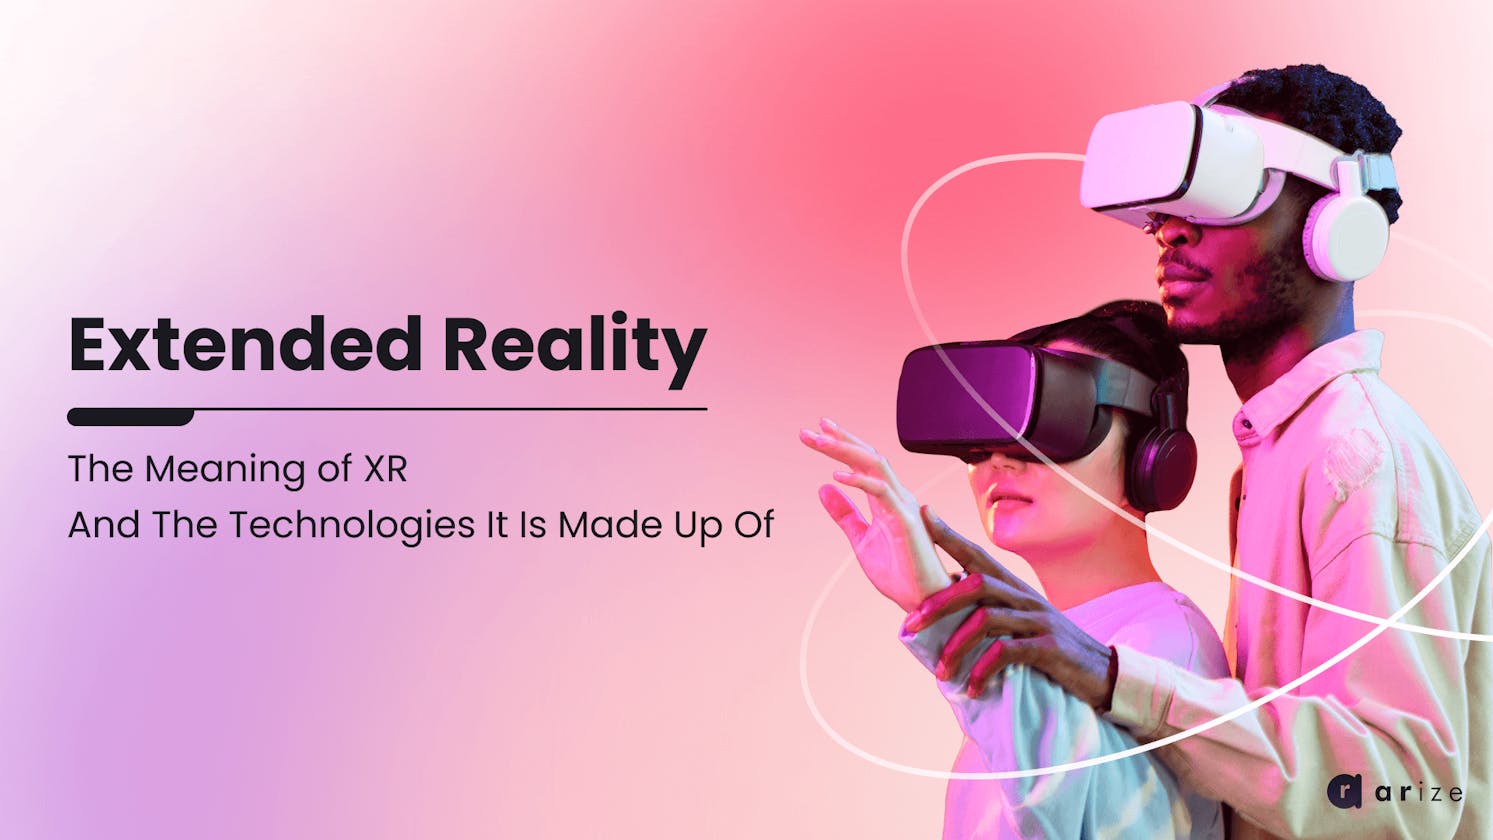 All about Extended Reality / XR